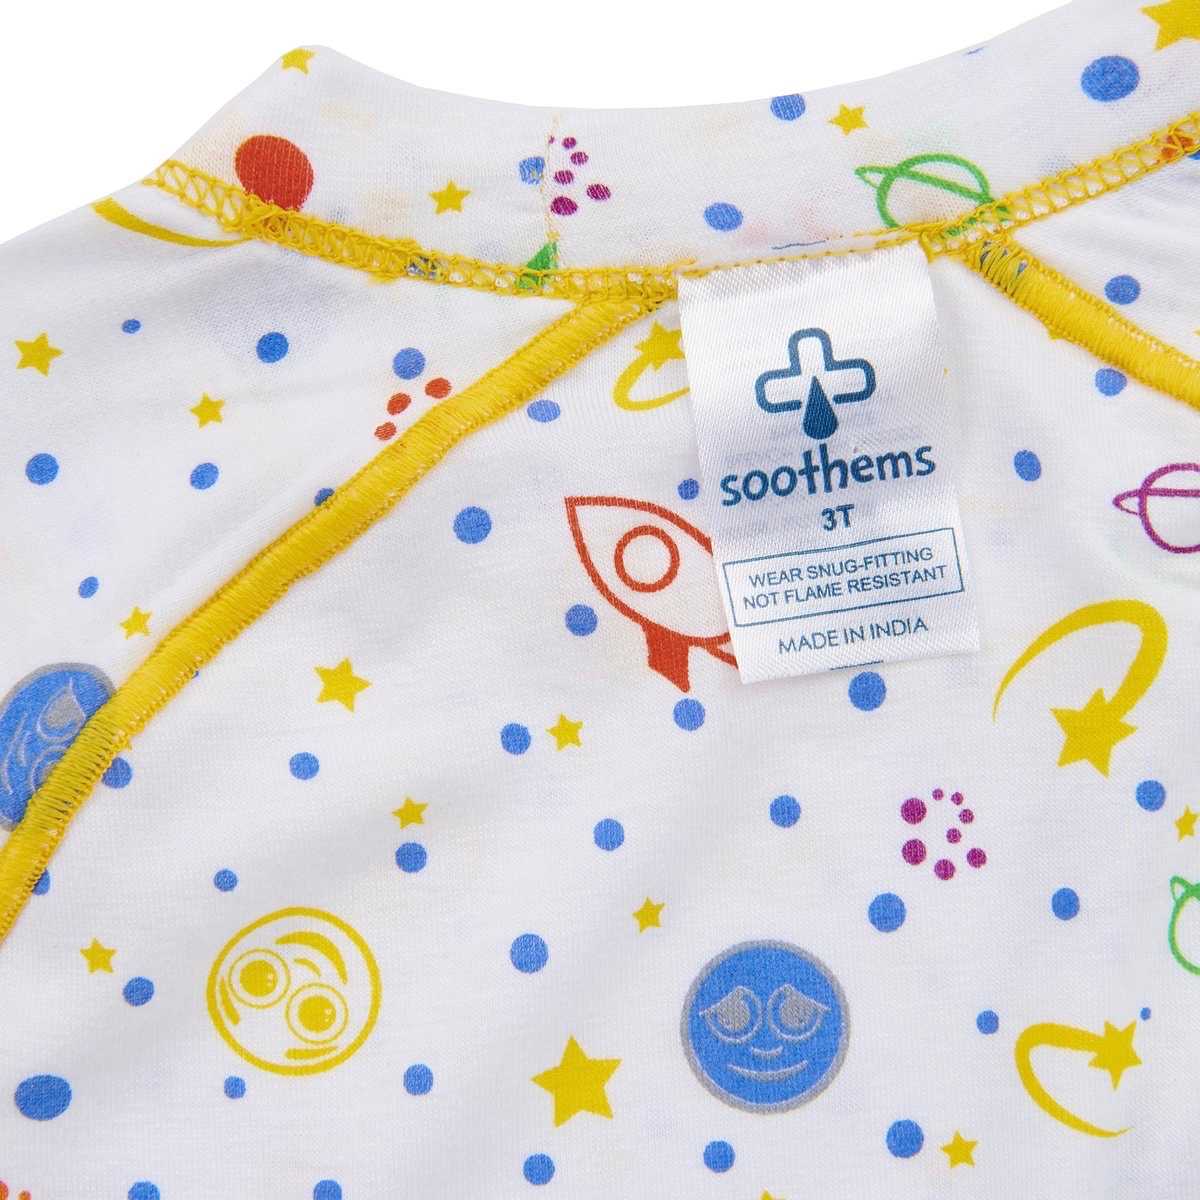 Soothems Eczema Clothing for Children and Eczema Clothing for Adults - Eczema Clothing